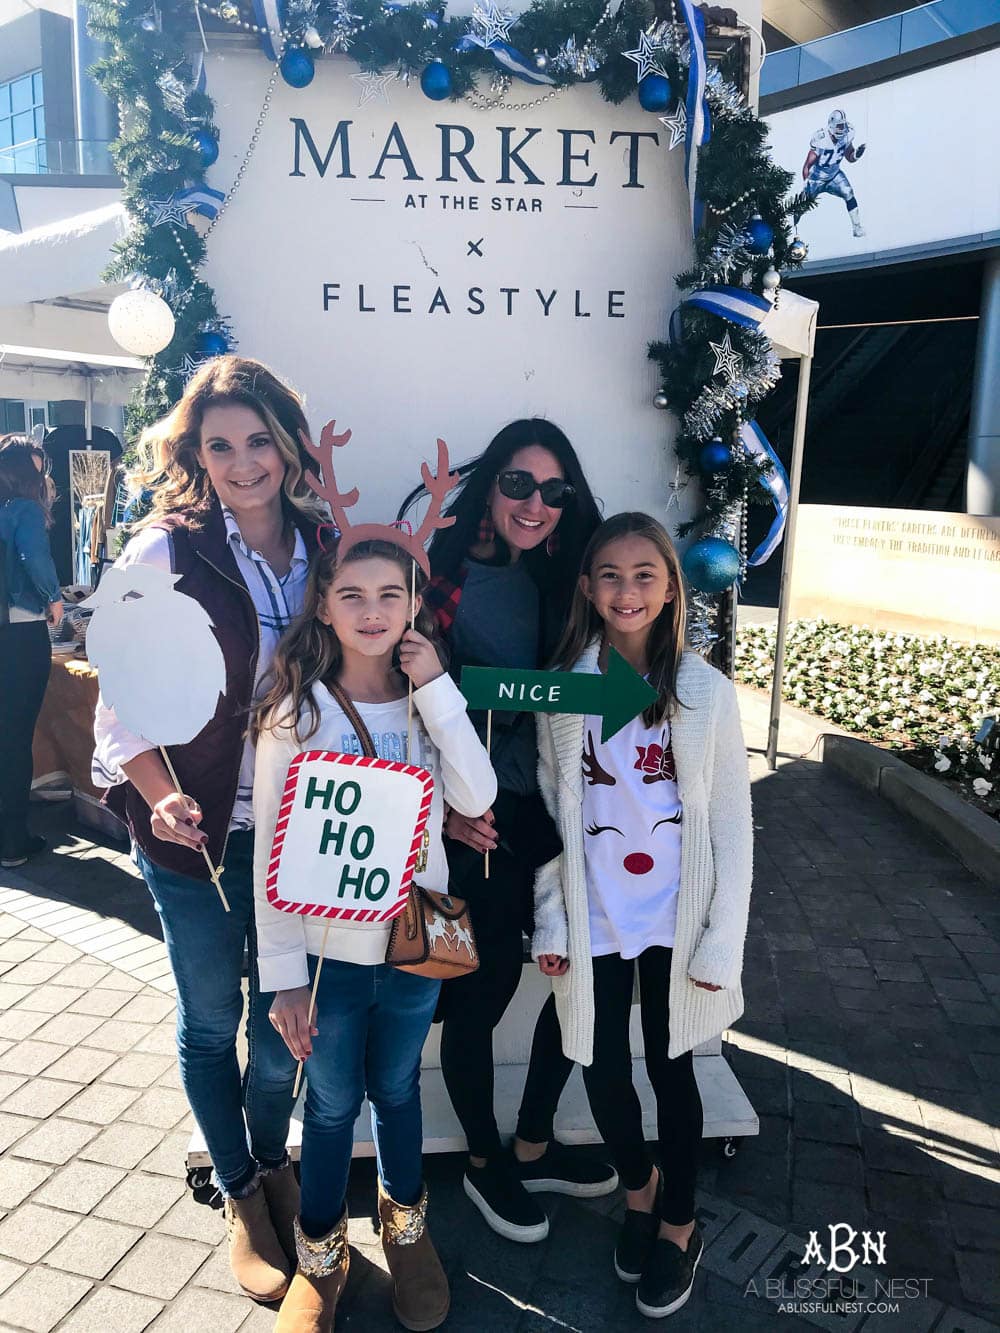 The Star District as it's the perfect place to shop, dine, and bring the family to experience the Dallas Cowboys themed campus. Offering more than thirty restaurants, shopping and specialty services, The Star District is a place for the whole family to enjoy. #ad #TheStar #MarketAtTheStar